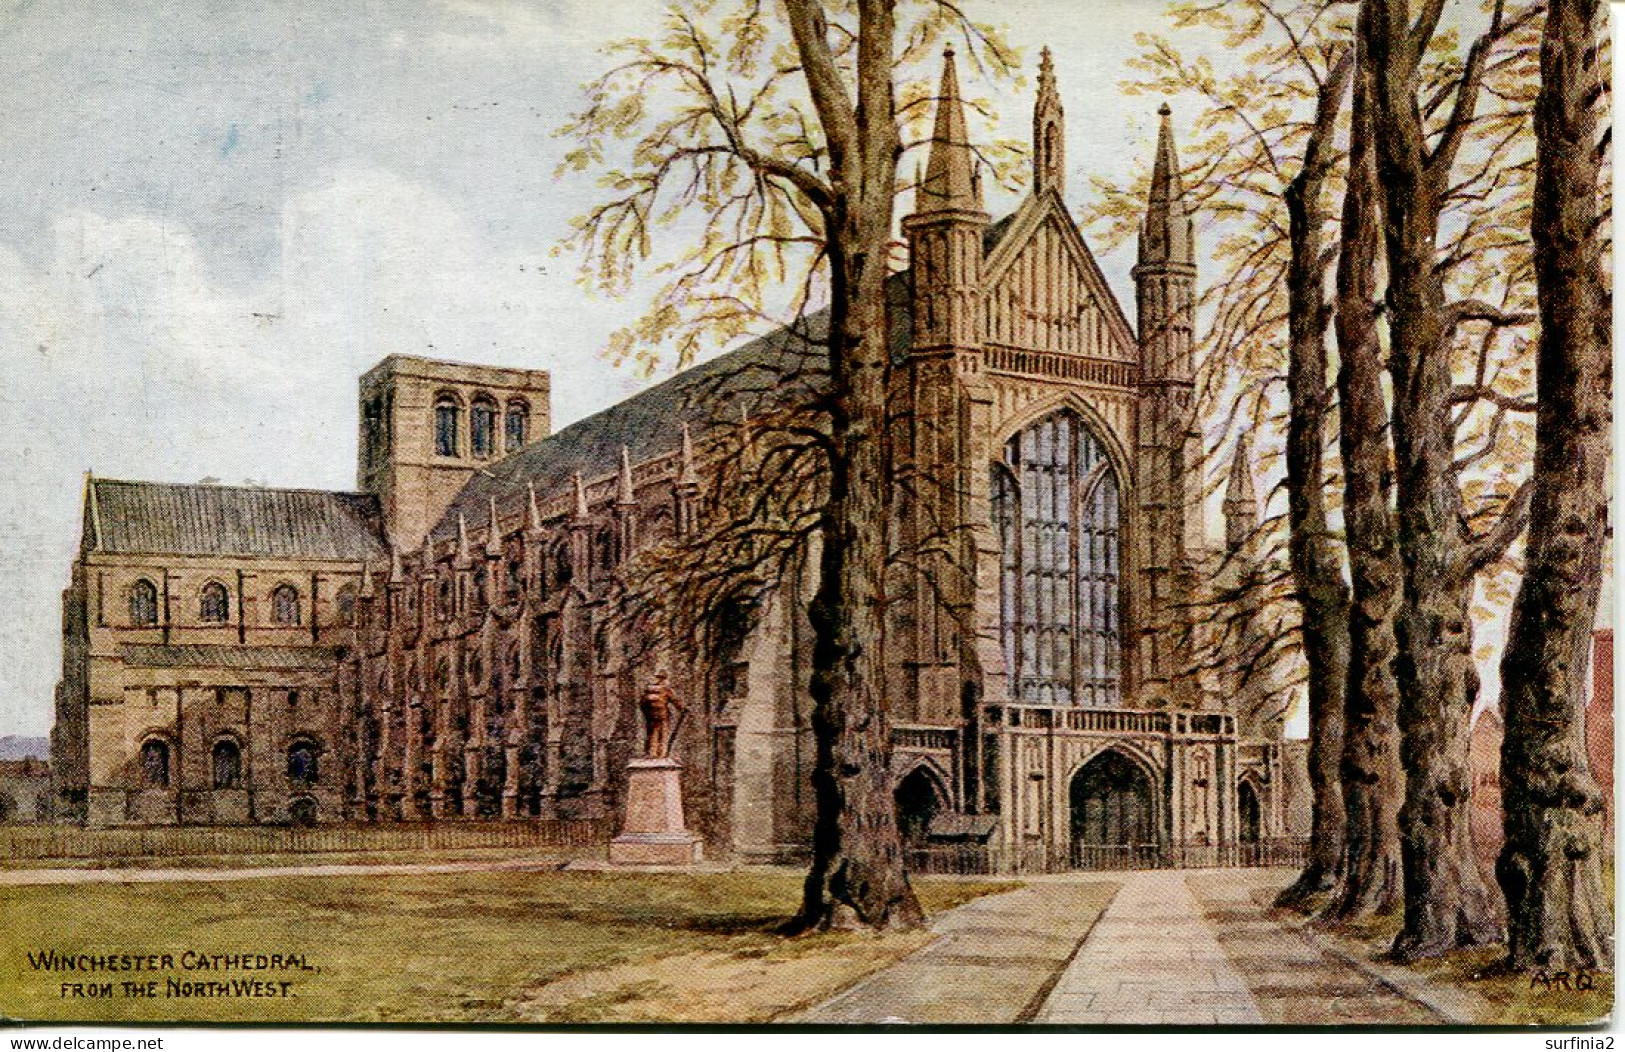 A R QUINTON - SALMON 3771- WINCHESTER CATHEDRAL FROM THE NORTHWEST - WITH STATUE - Quinton, AR